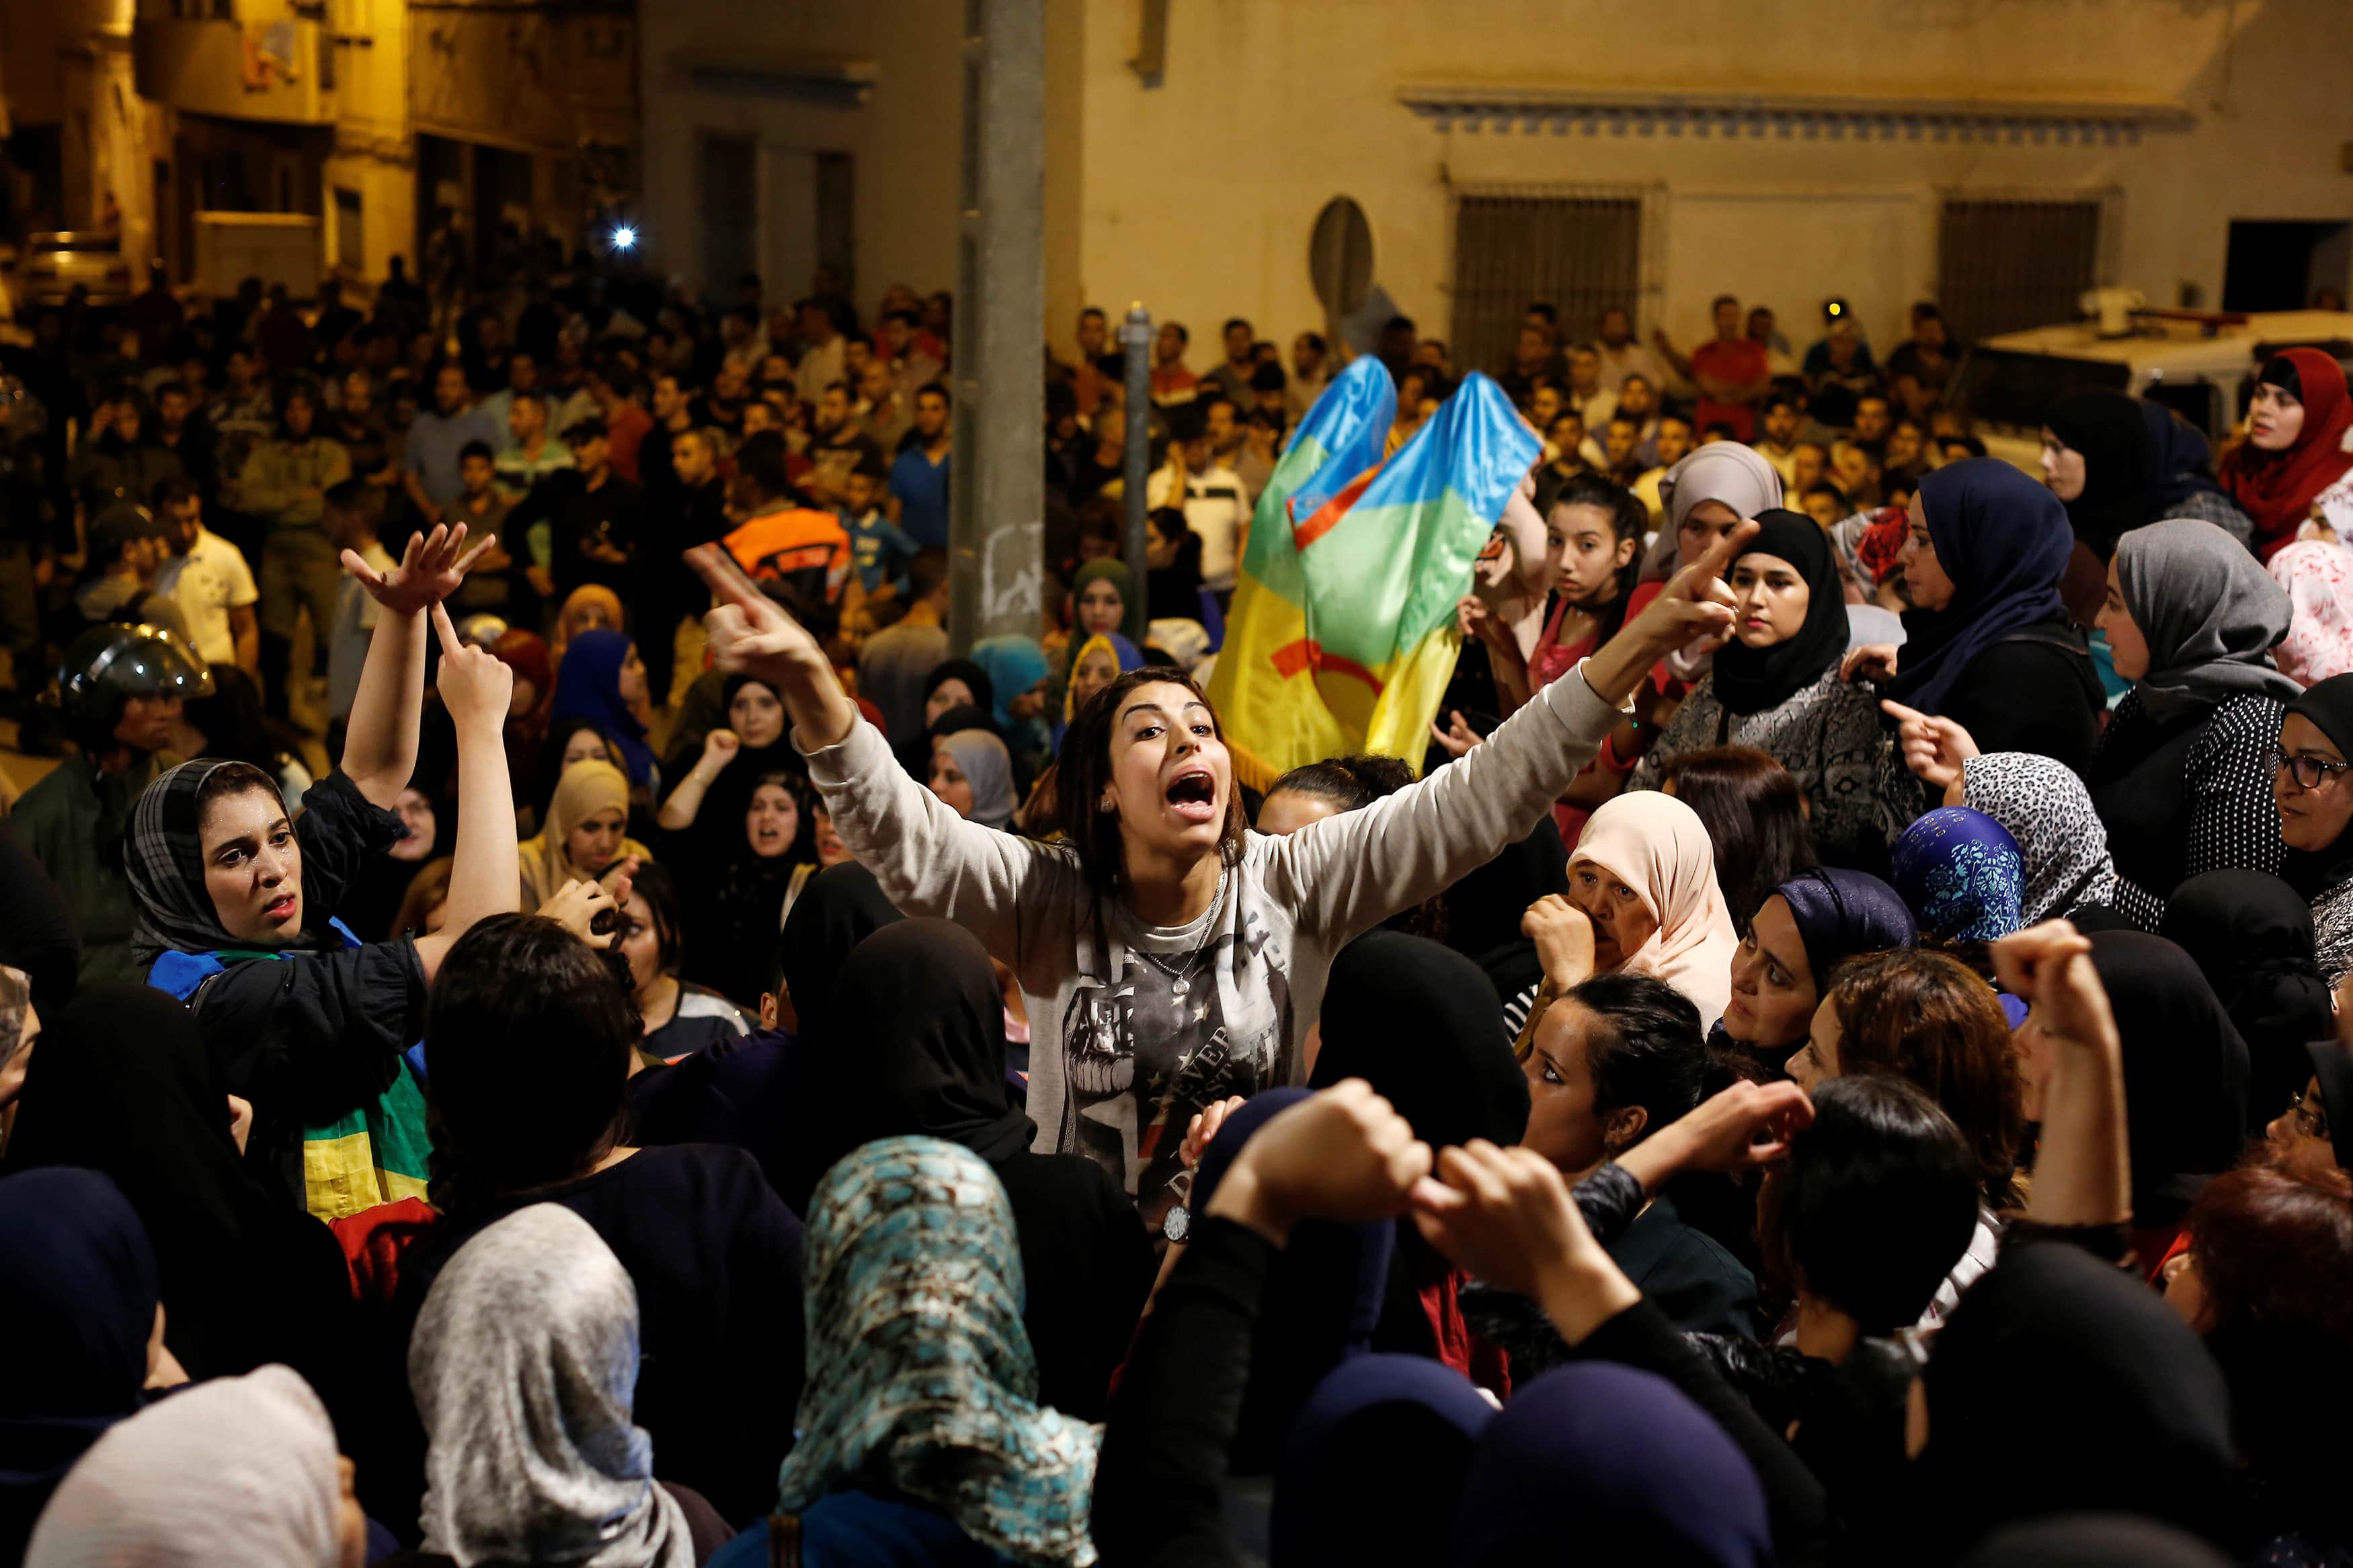 Women shout during a protest against official abuses and corruption in the town of Al-Hoceima, in northern Morocco's Rif region, 3 June 2017